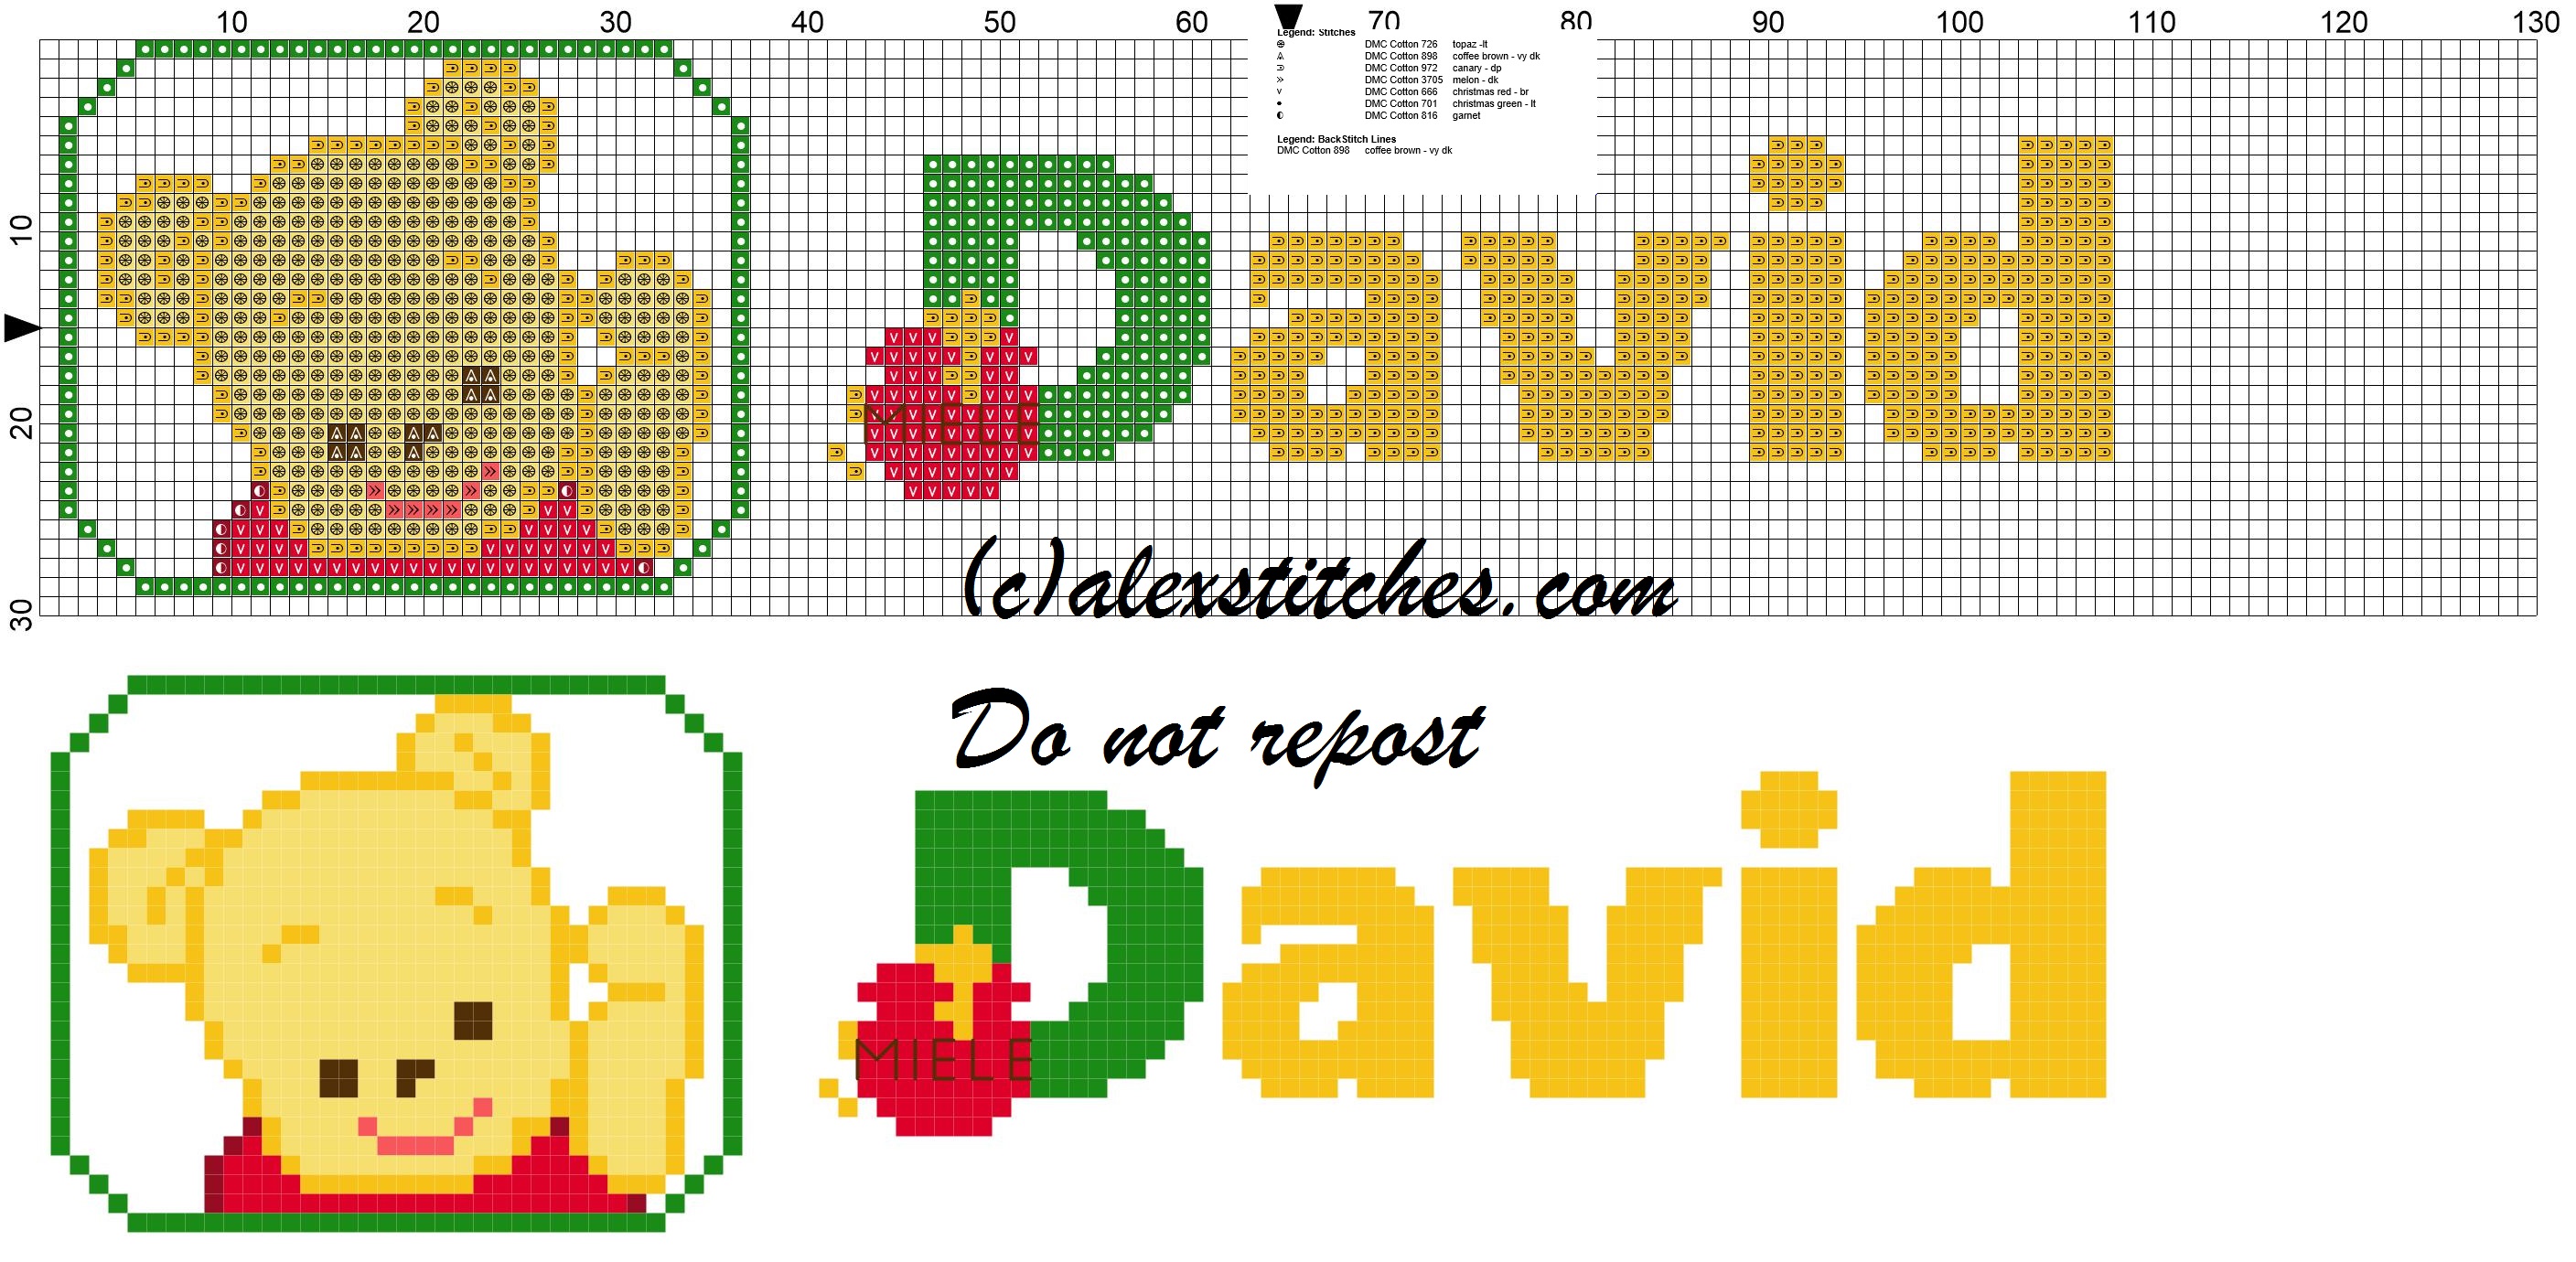 David name with Baby winnie the pooh free cross stitches pattern